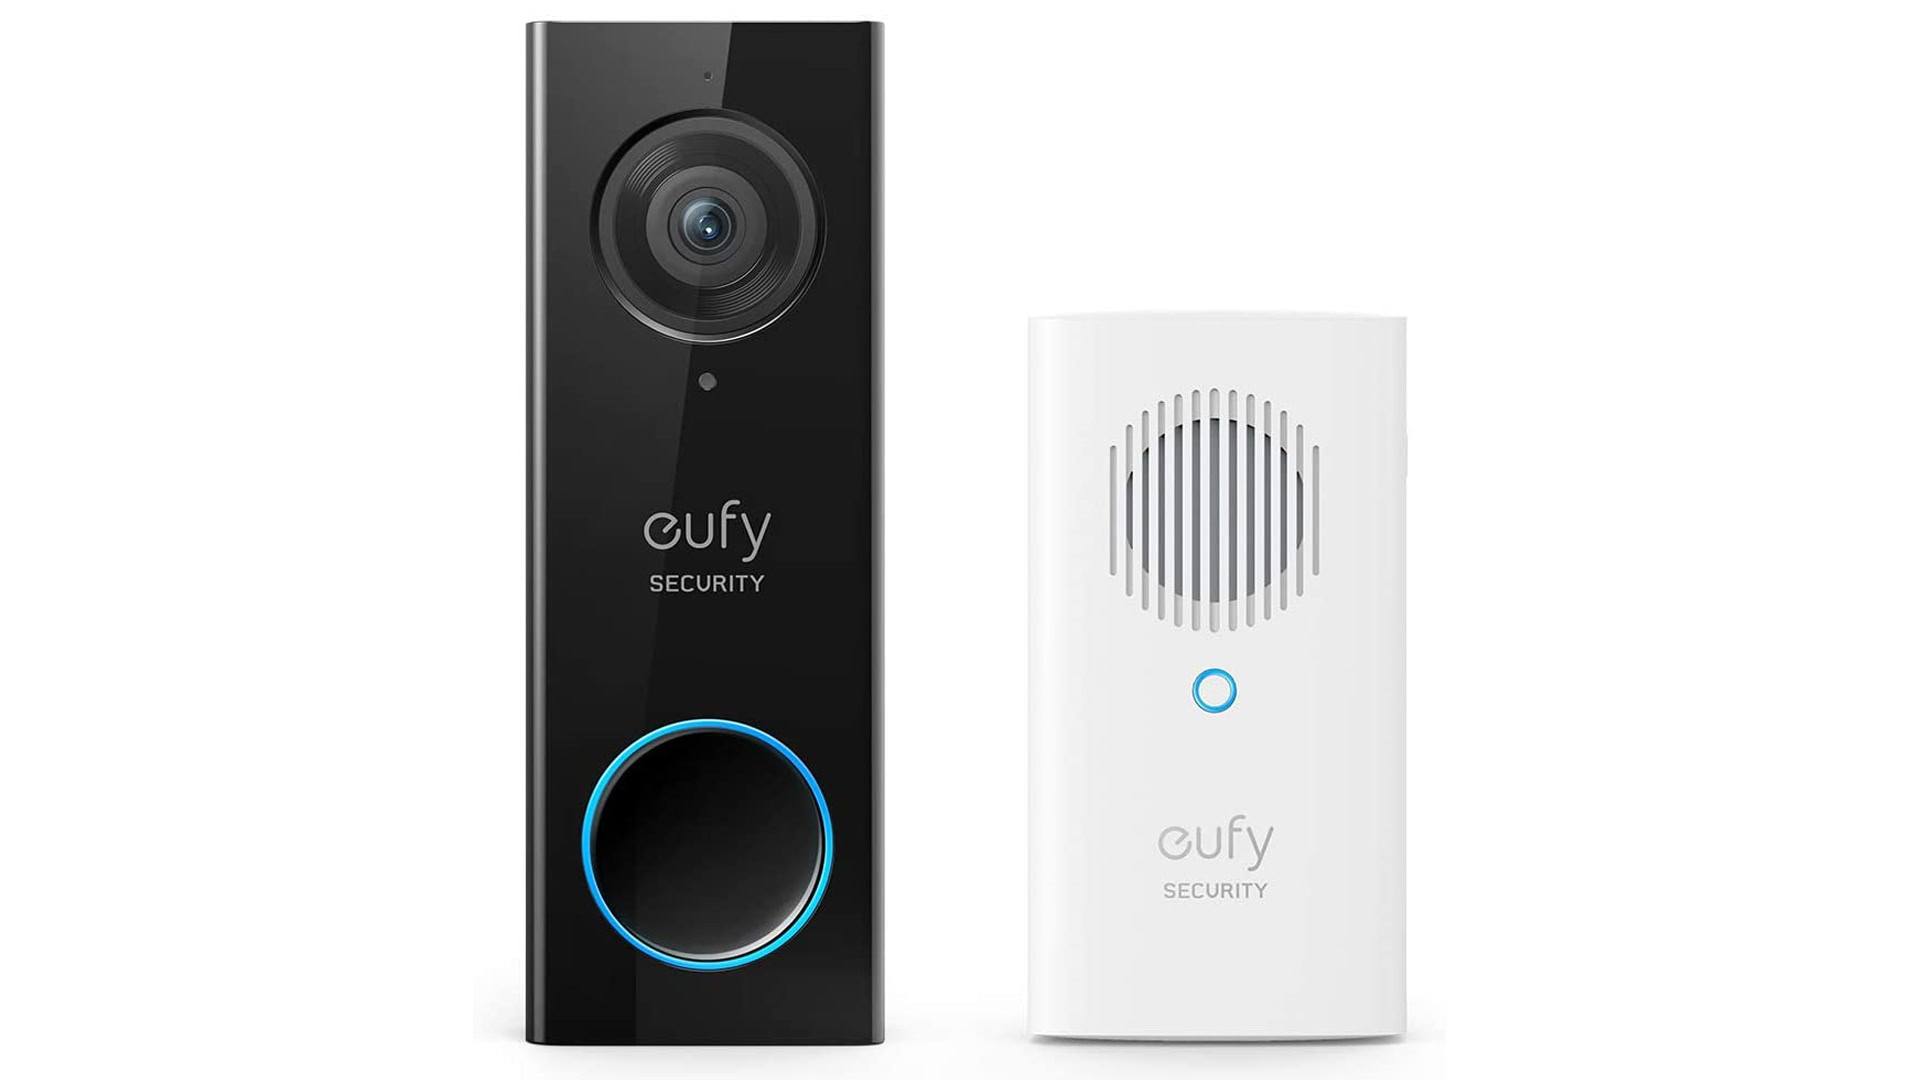 The Eufy 1080p Video Doorbell with its chime module